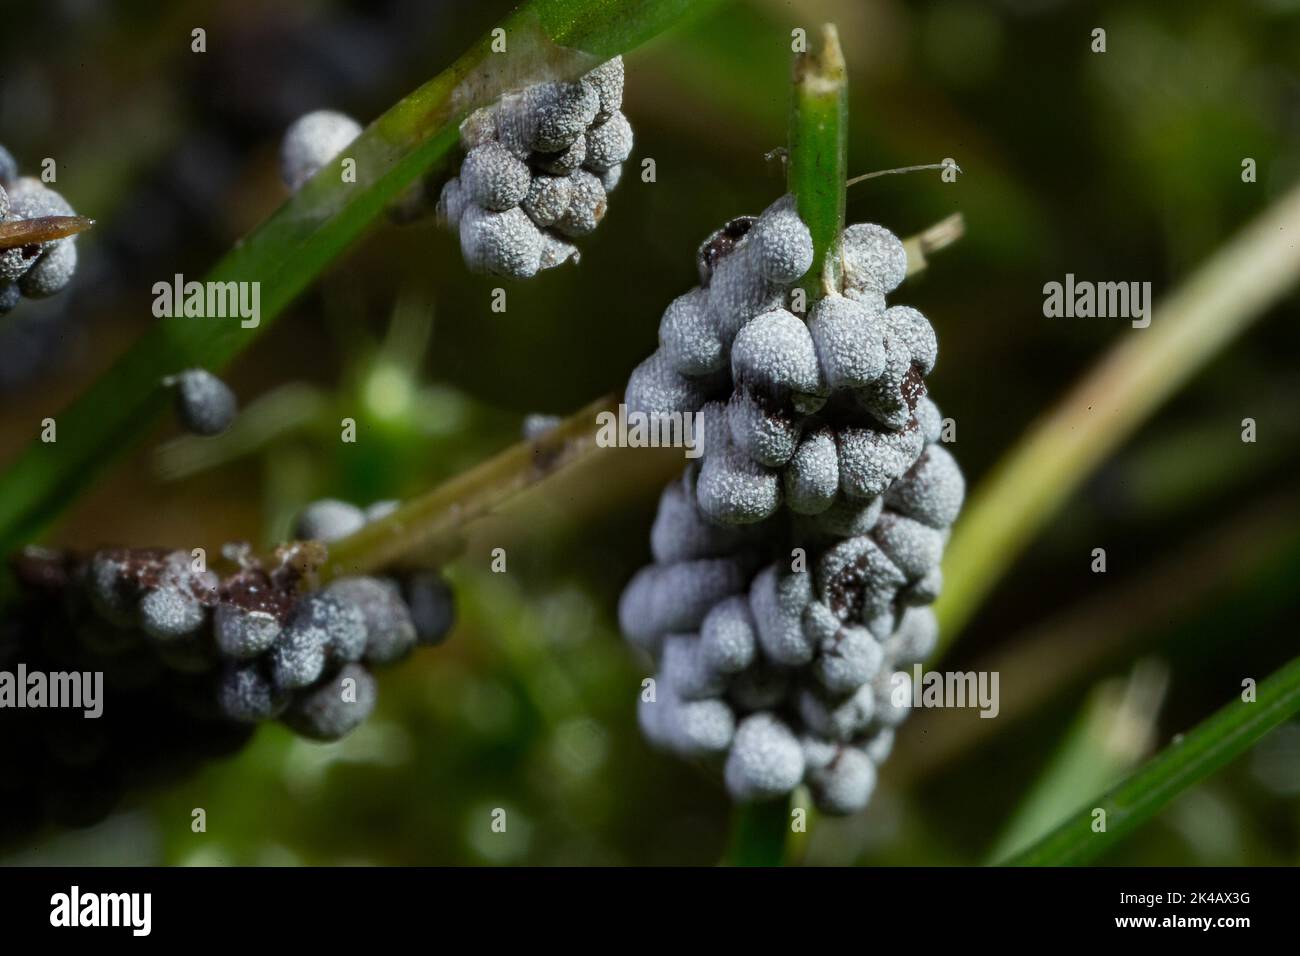 Slime mould Physarum leucopus many lime-pollinated fruiting bodies on green grass blade Stock Photo